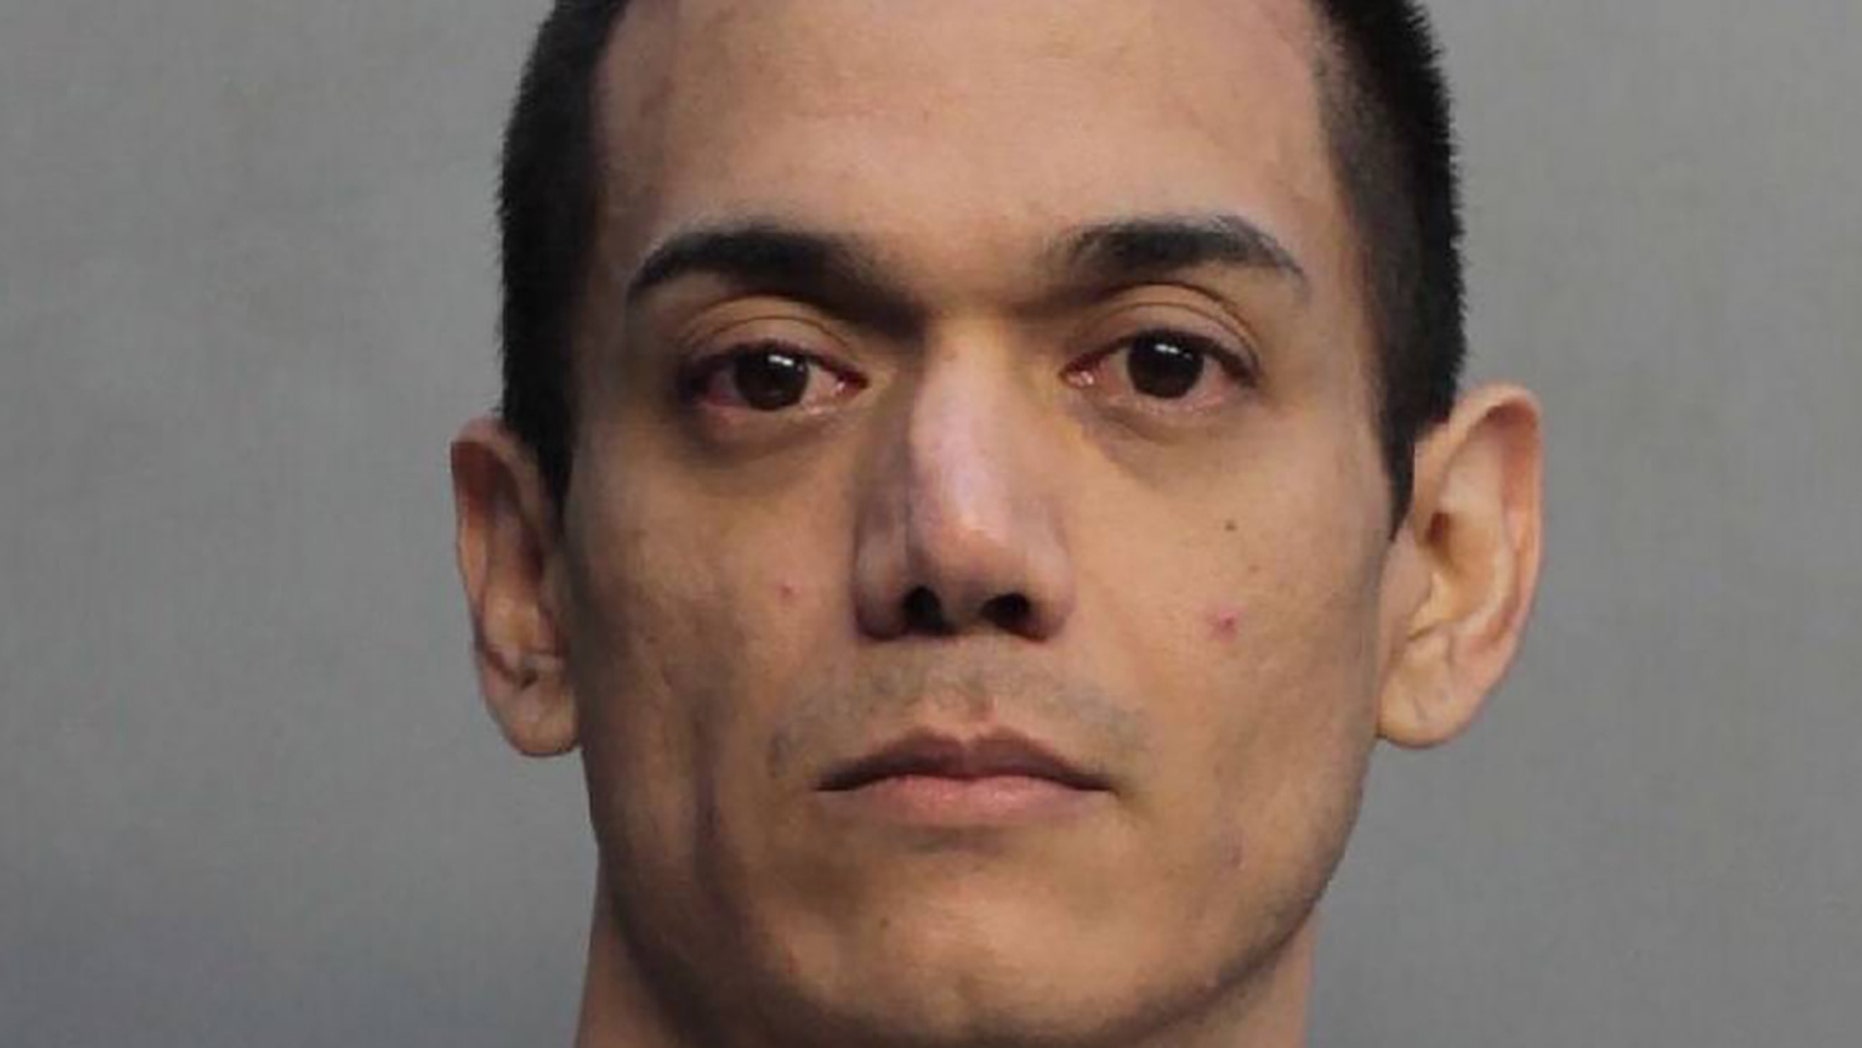 Florida Man 33 Posed As Housewife To Lure Men Into Home Where He